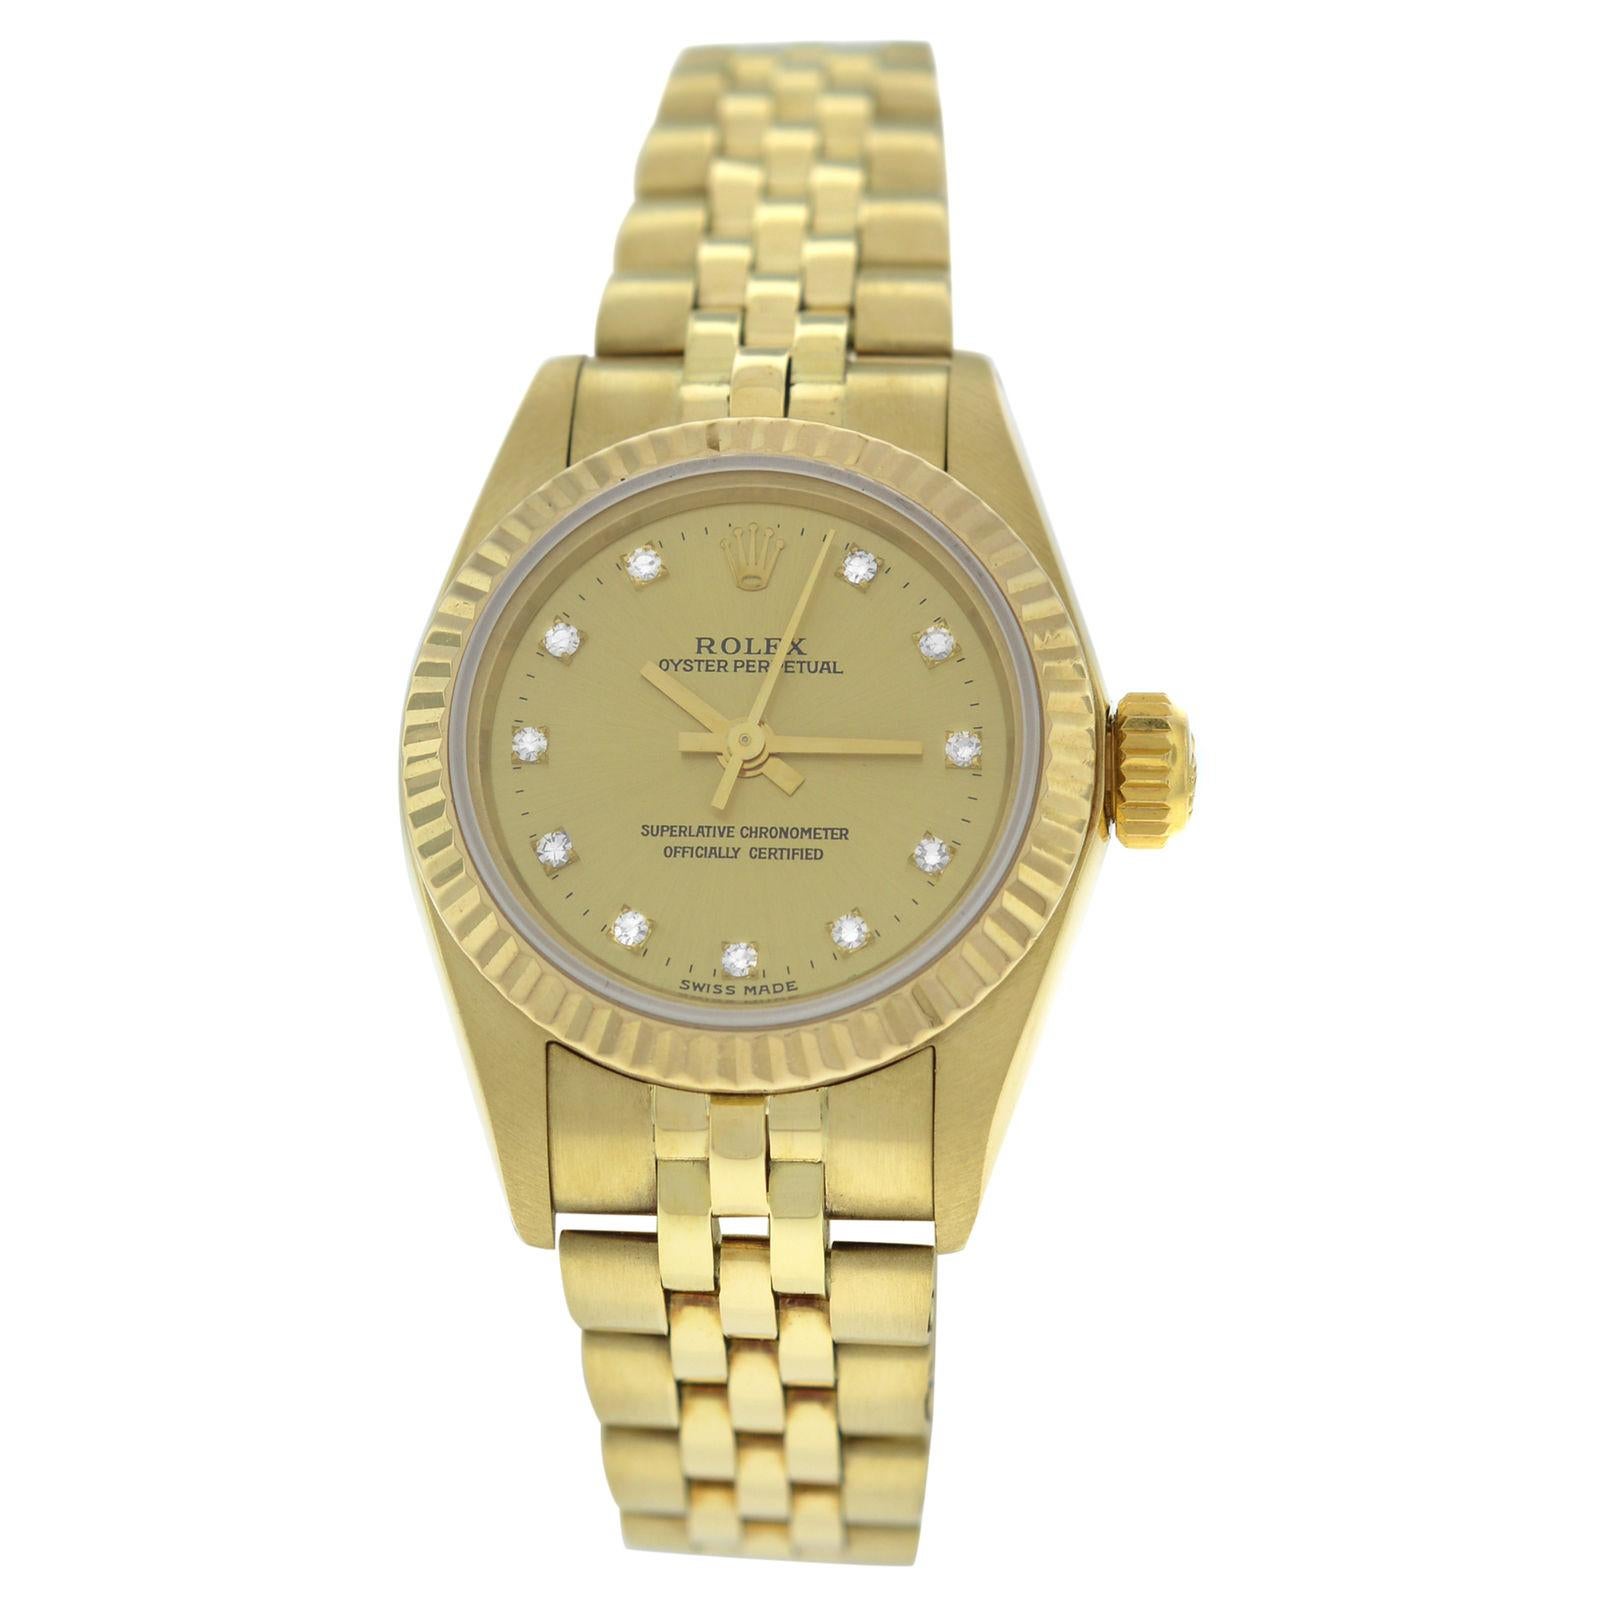 Ladies Rolex Oyster Perpetual 14 Karat Yellow Gold Diamond Dial Watch For Sale